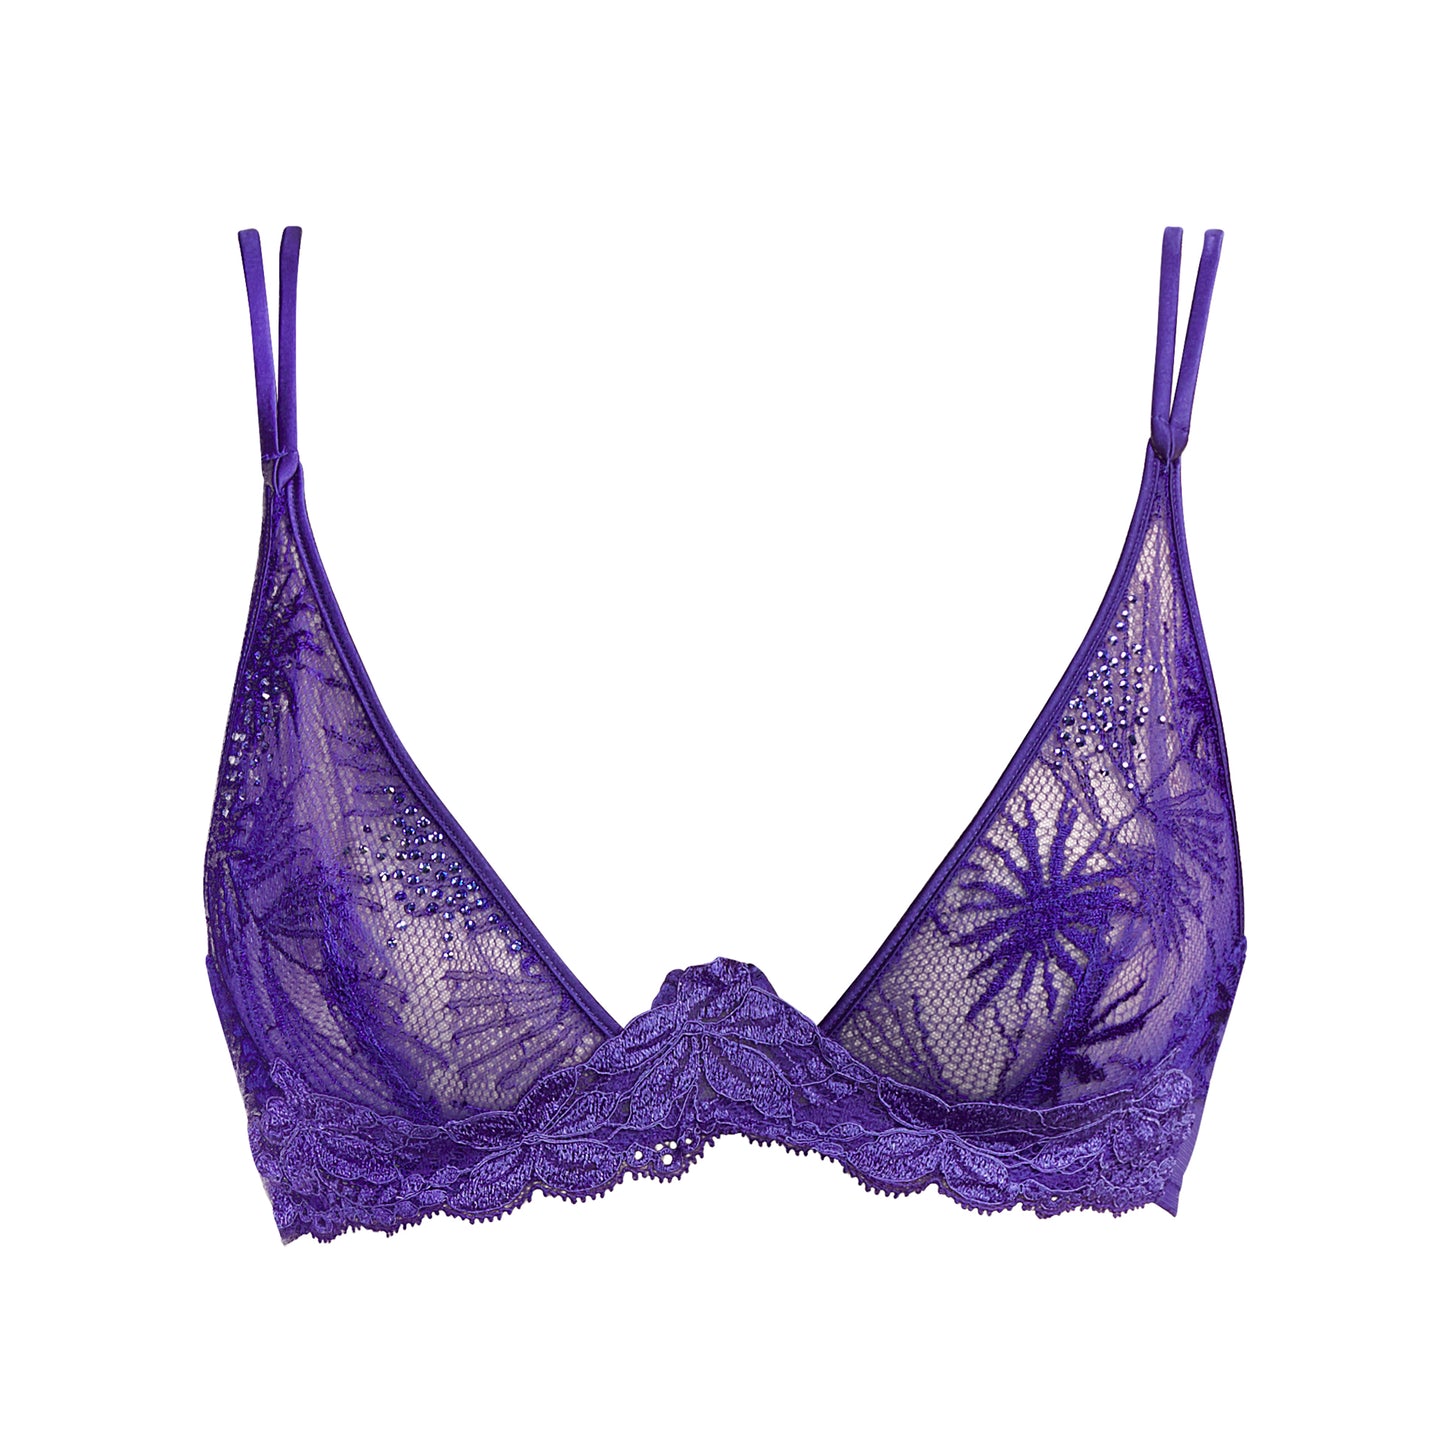 Andres Sarda Andraos imago bh funky violet